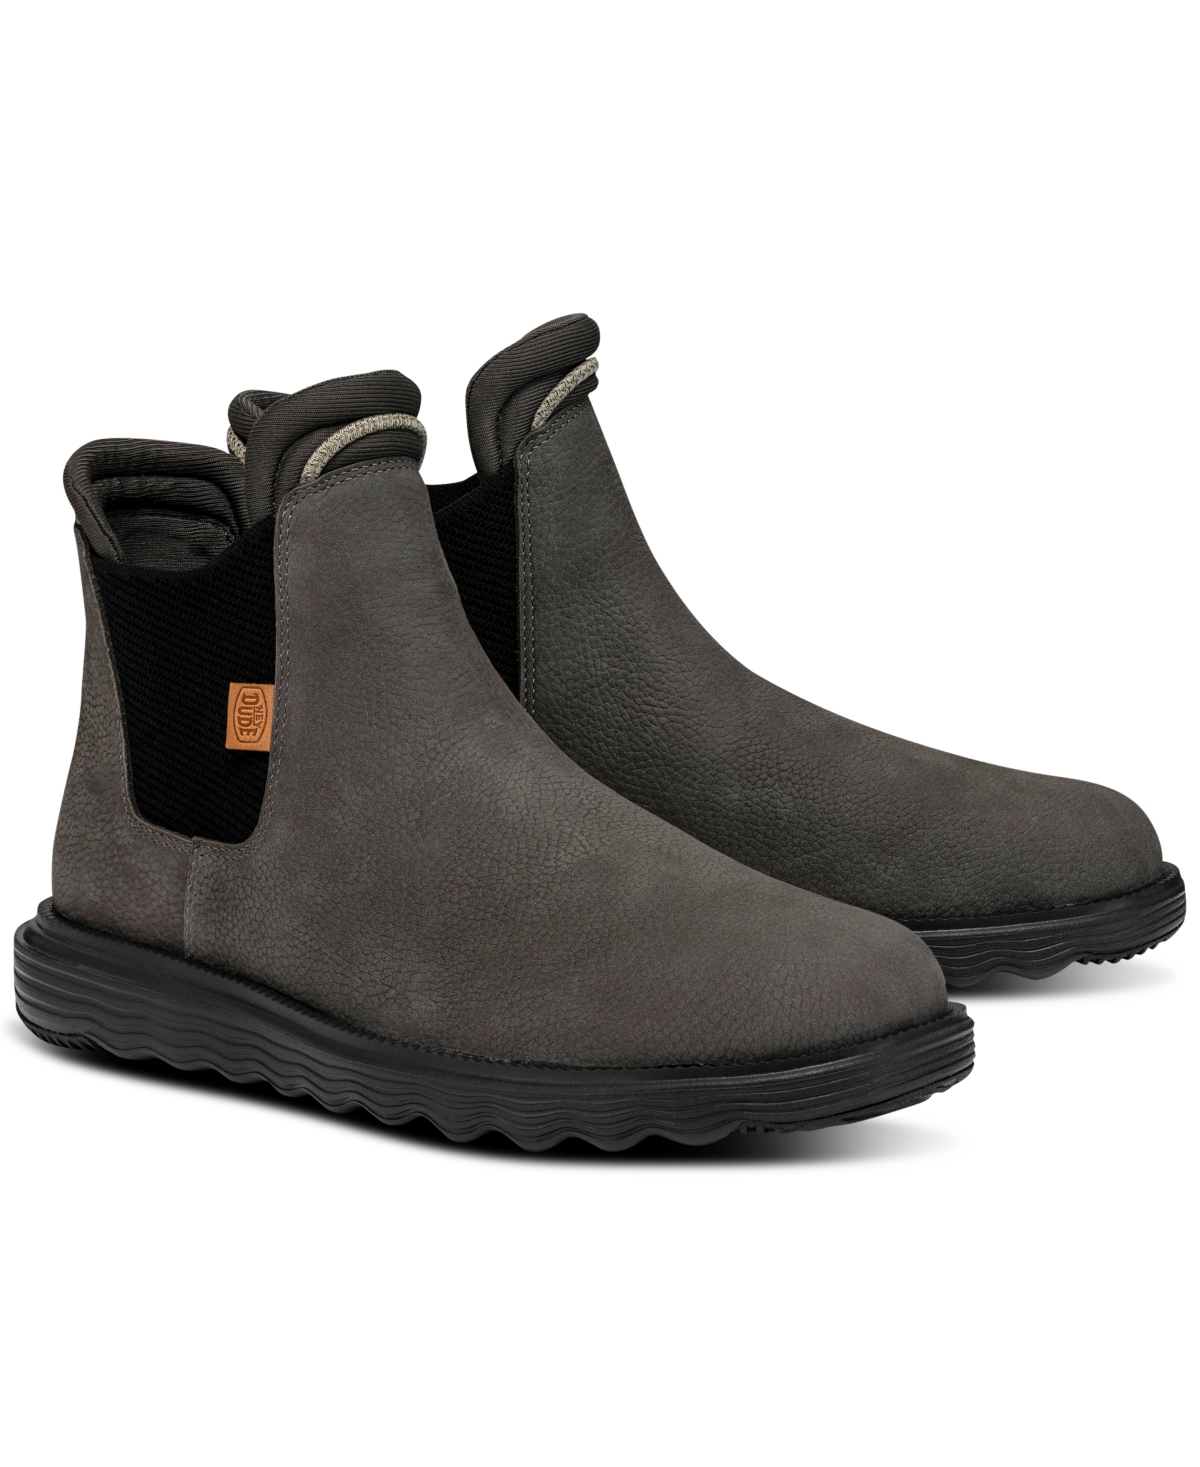 Men's Branson Craft Leather Casual Chelsea Boots from Finish Line - Gray